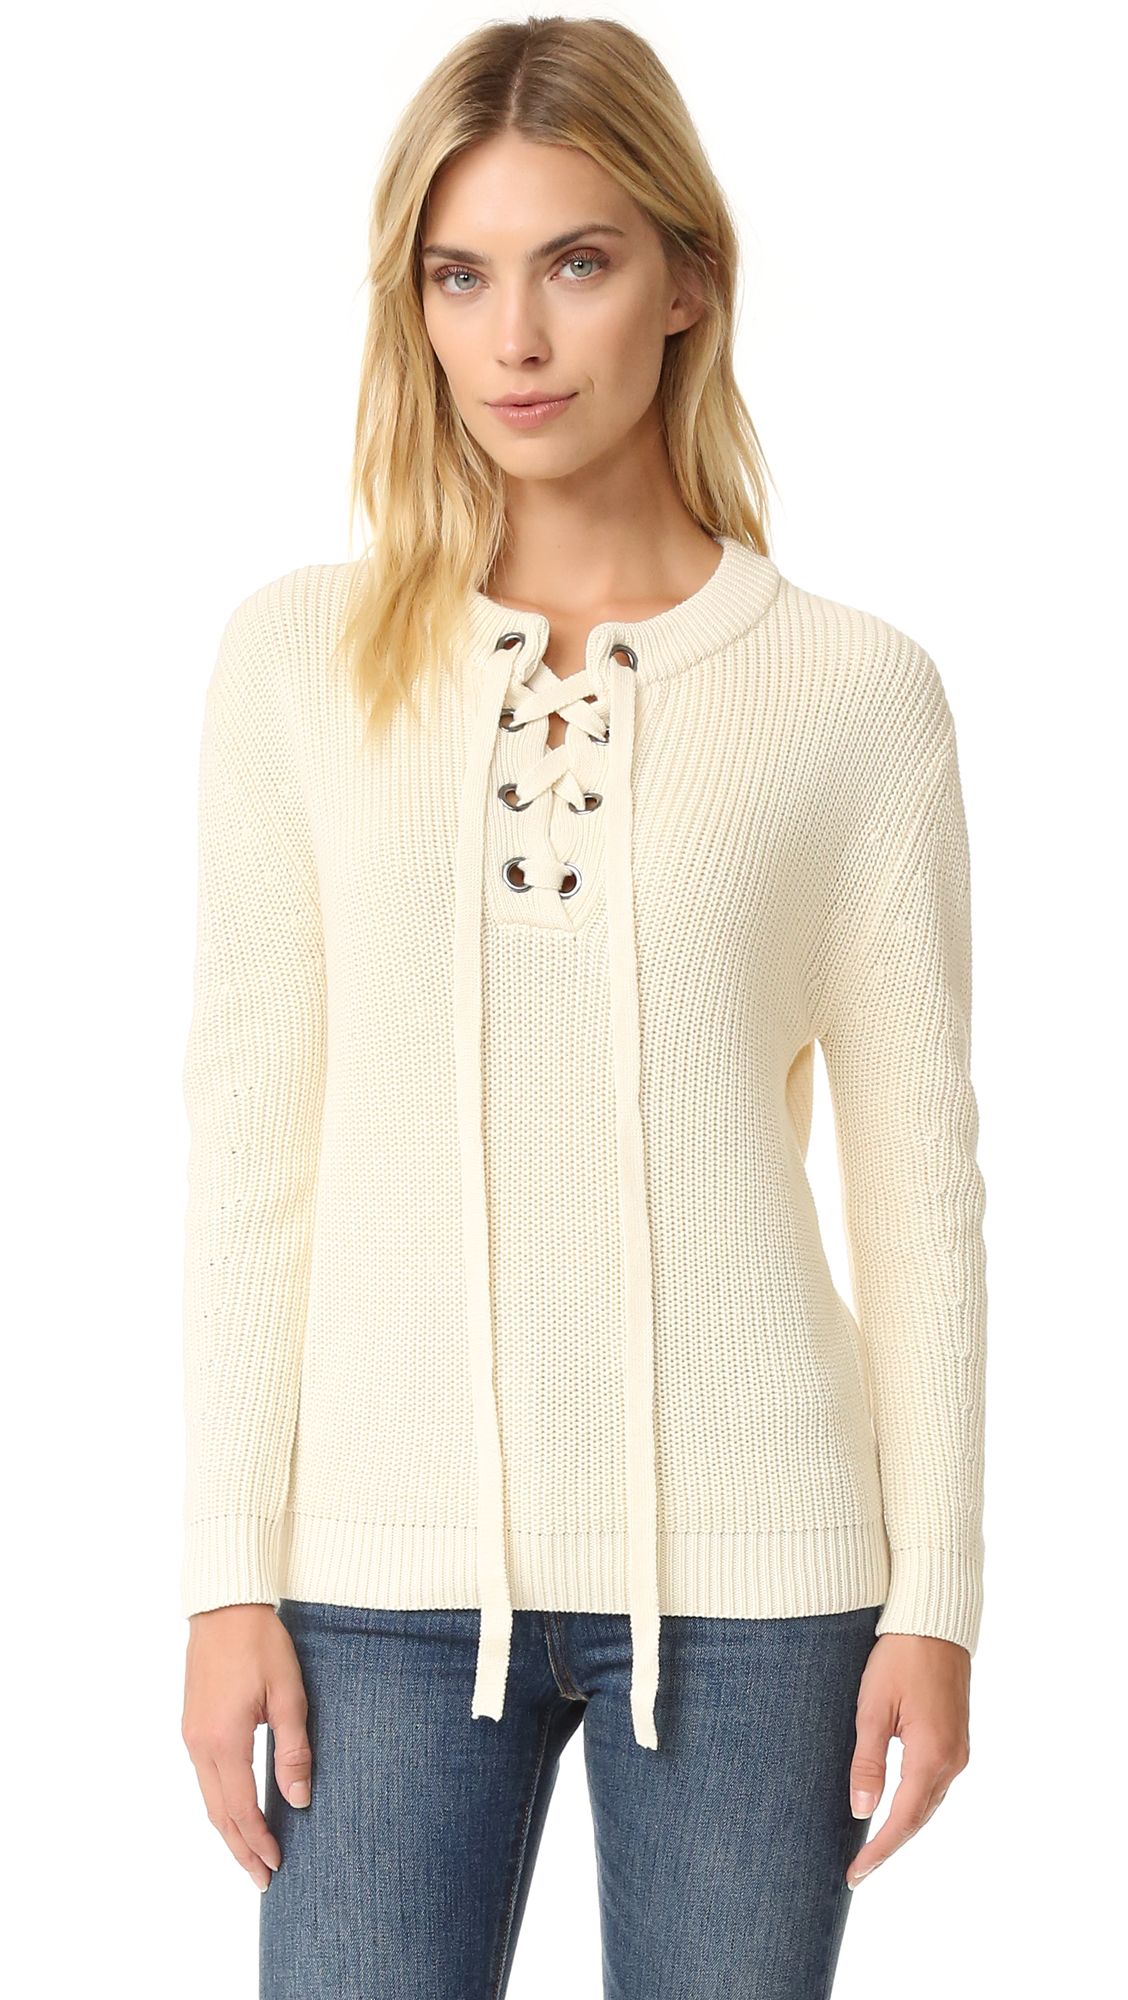 Lace Up Sweater | Shopbop